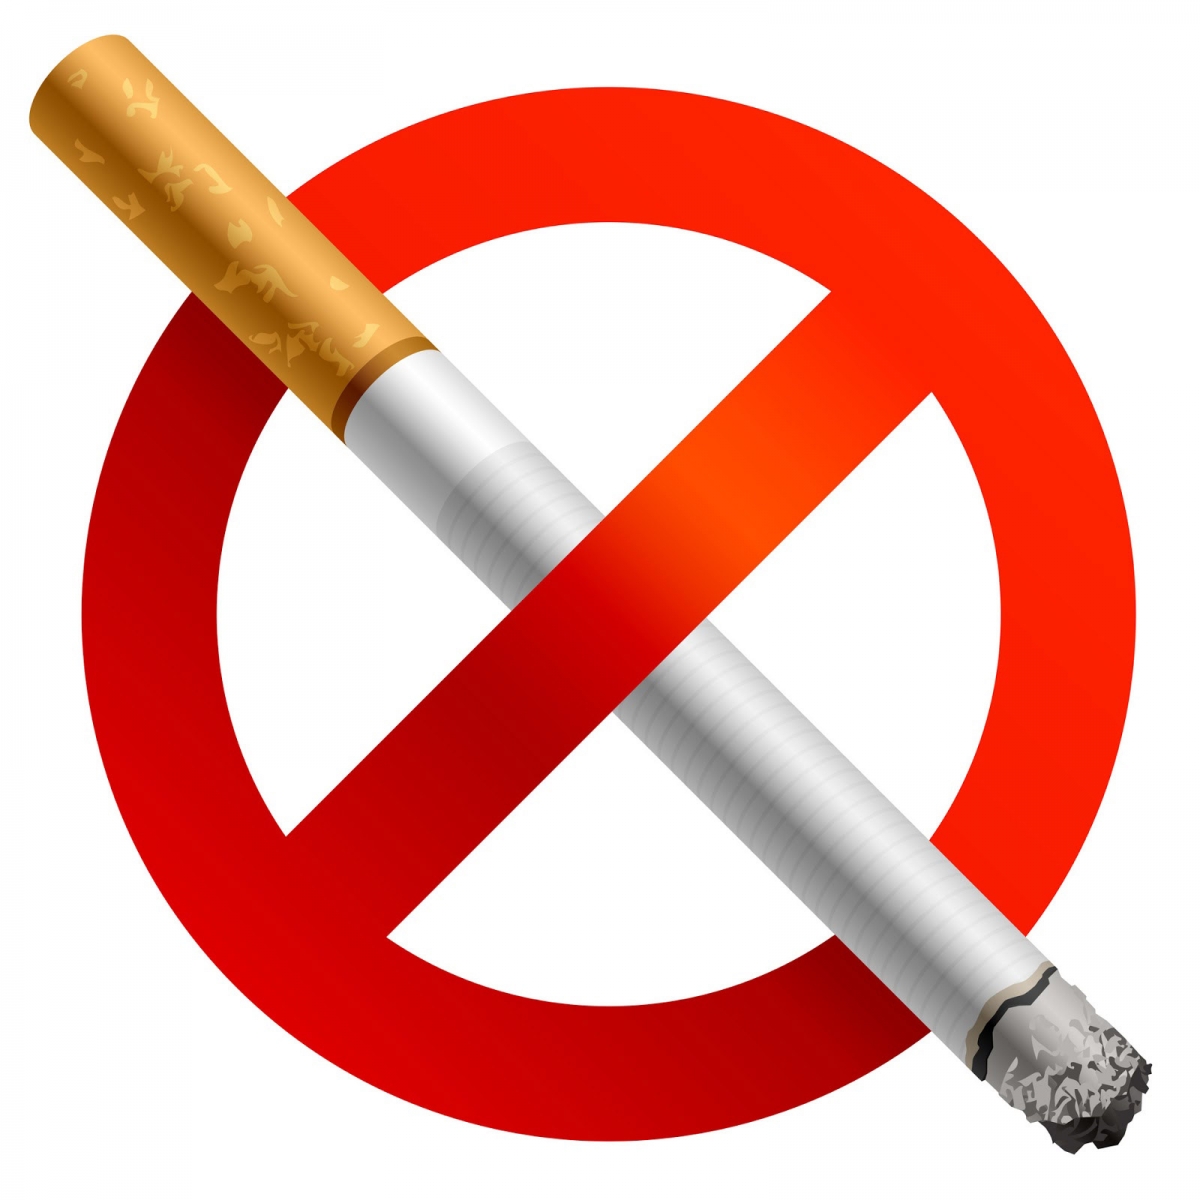 Smoking increases surgical risks and should be stopped well in advance of your plastic surgery procedure. To learn more, call Scottsdale plastic surgeon Dr. John Corey at 480-767-7700